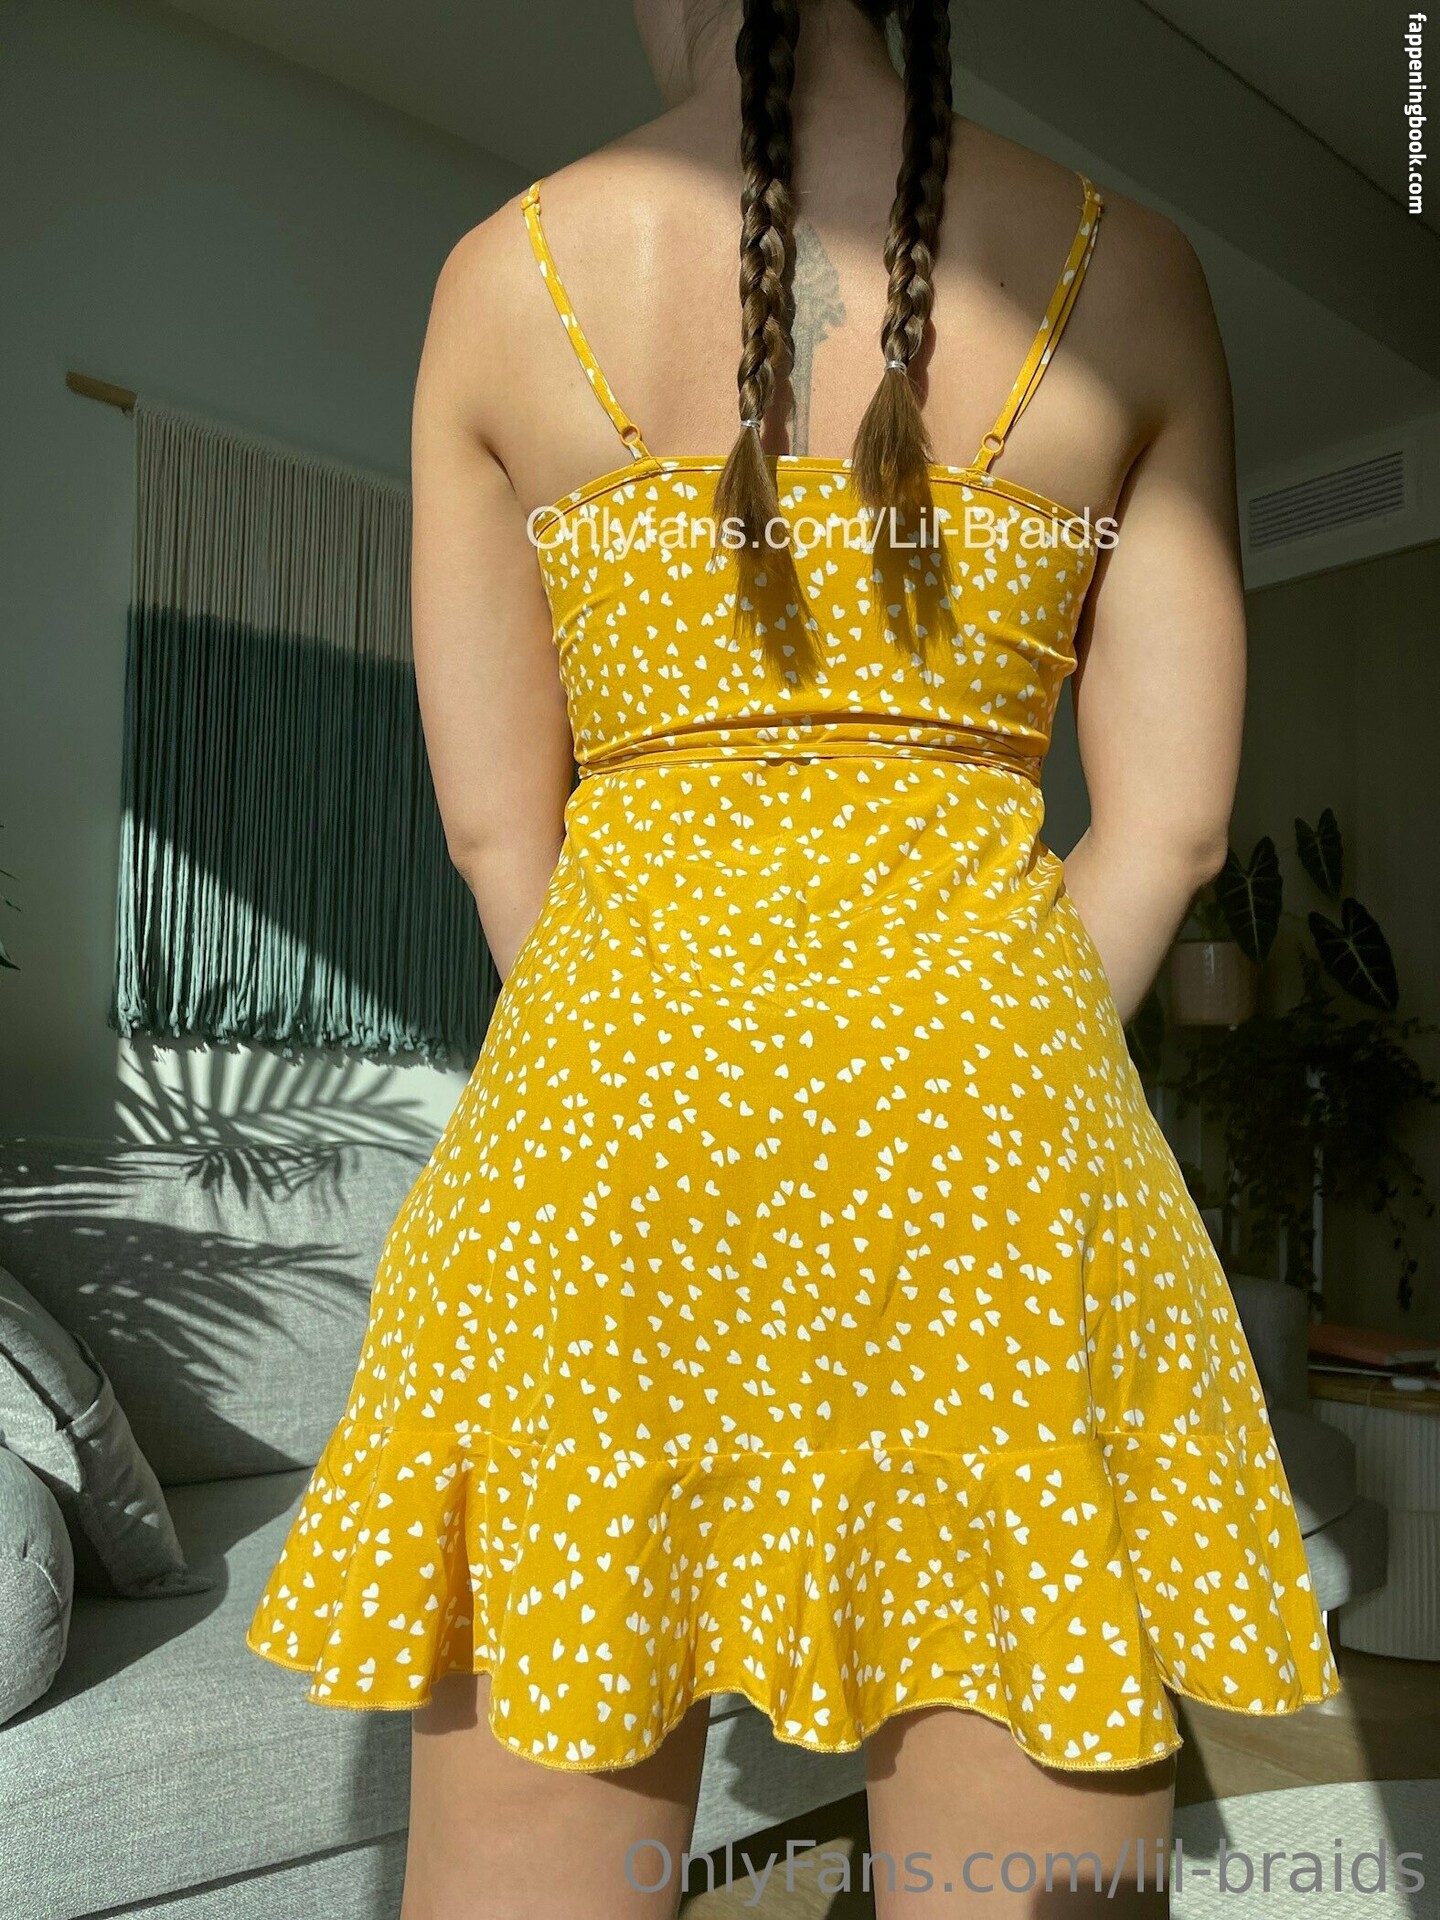 Lil Braids Lil Braids Nude Onlyfans Leaks The Fappening Photo 3991344 Fappeningbook 